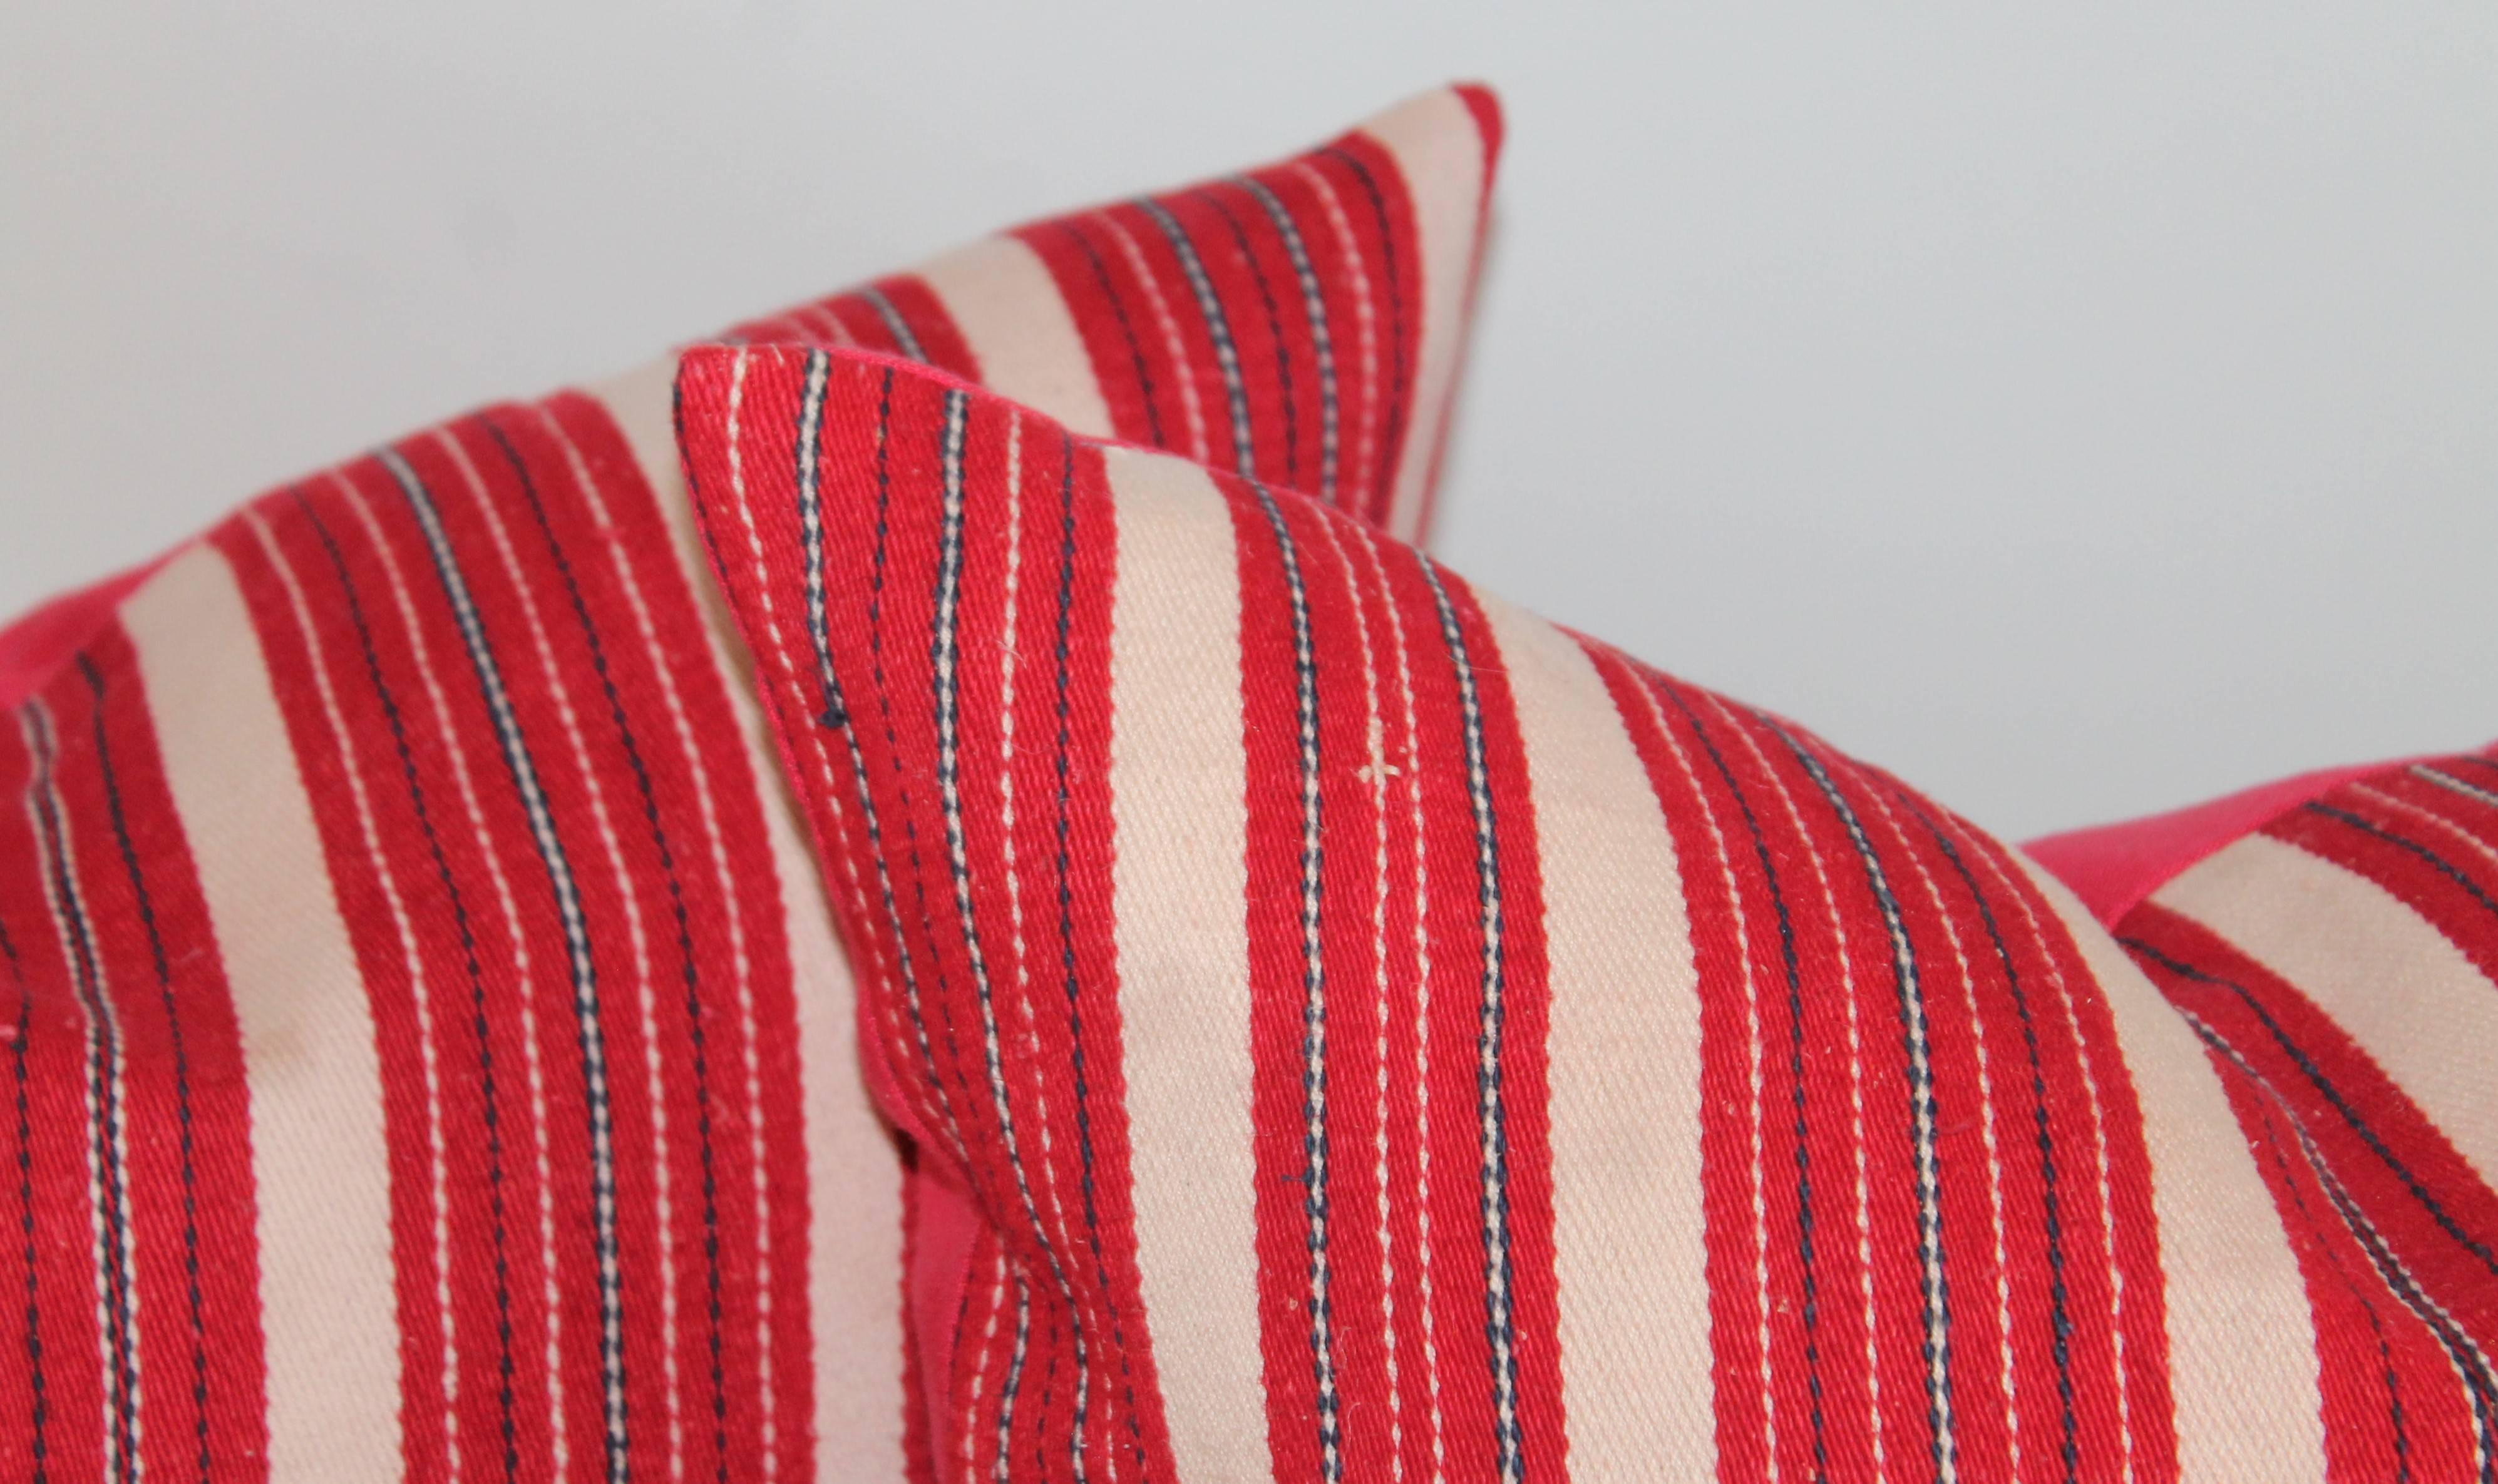 These interesting cotton red and white ticking pillows have red cotton linen backing. The inserts are down and feather fill. Two pairs in stock.